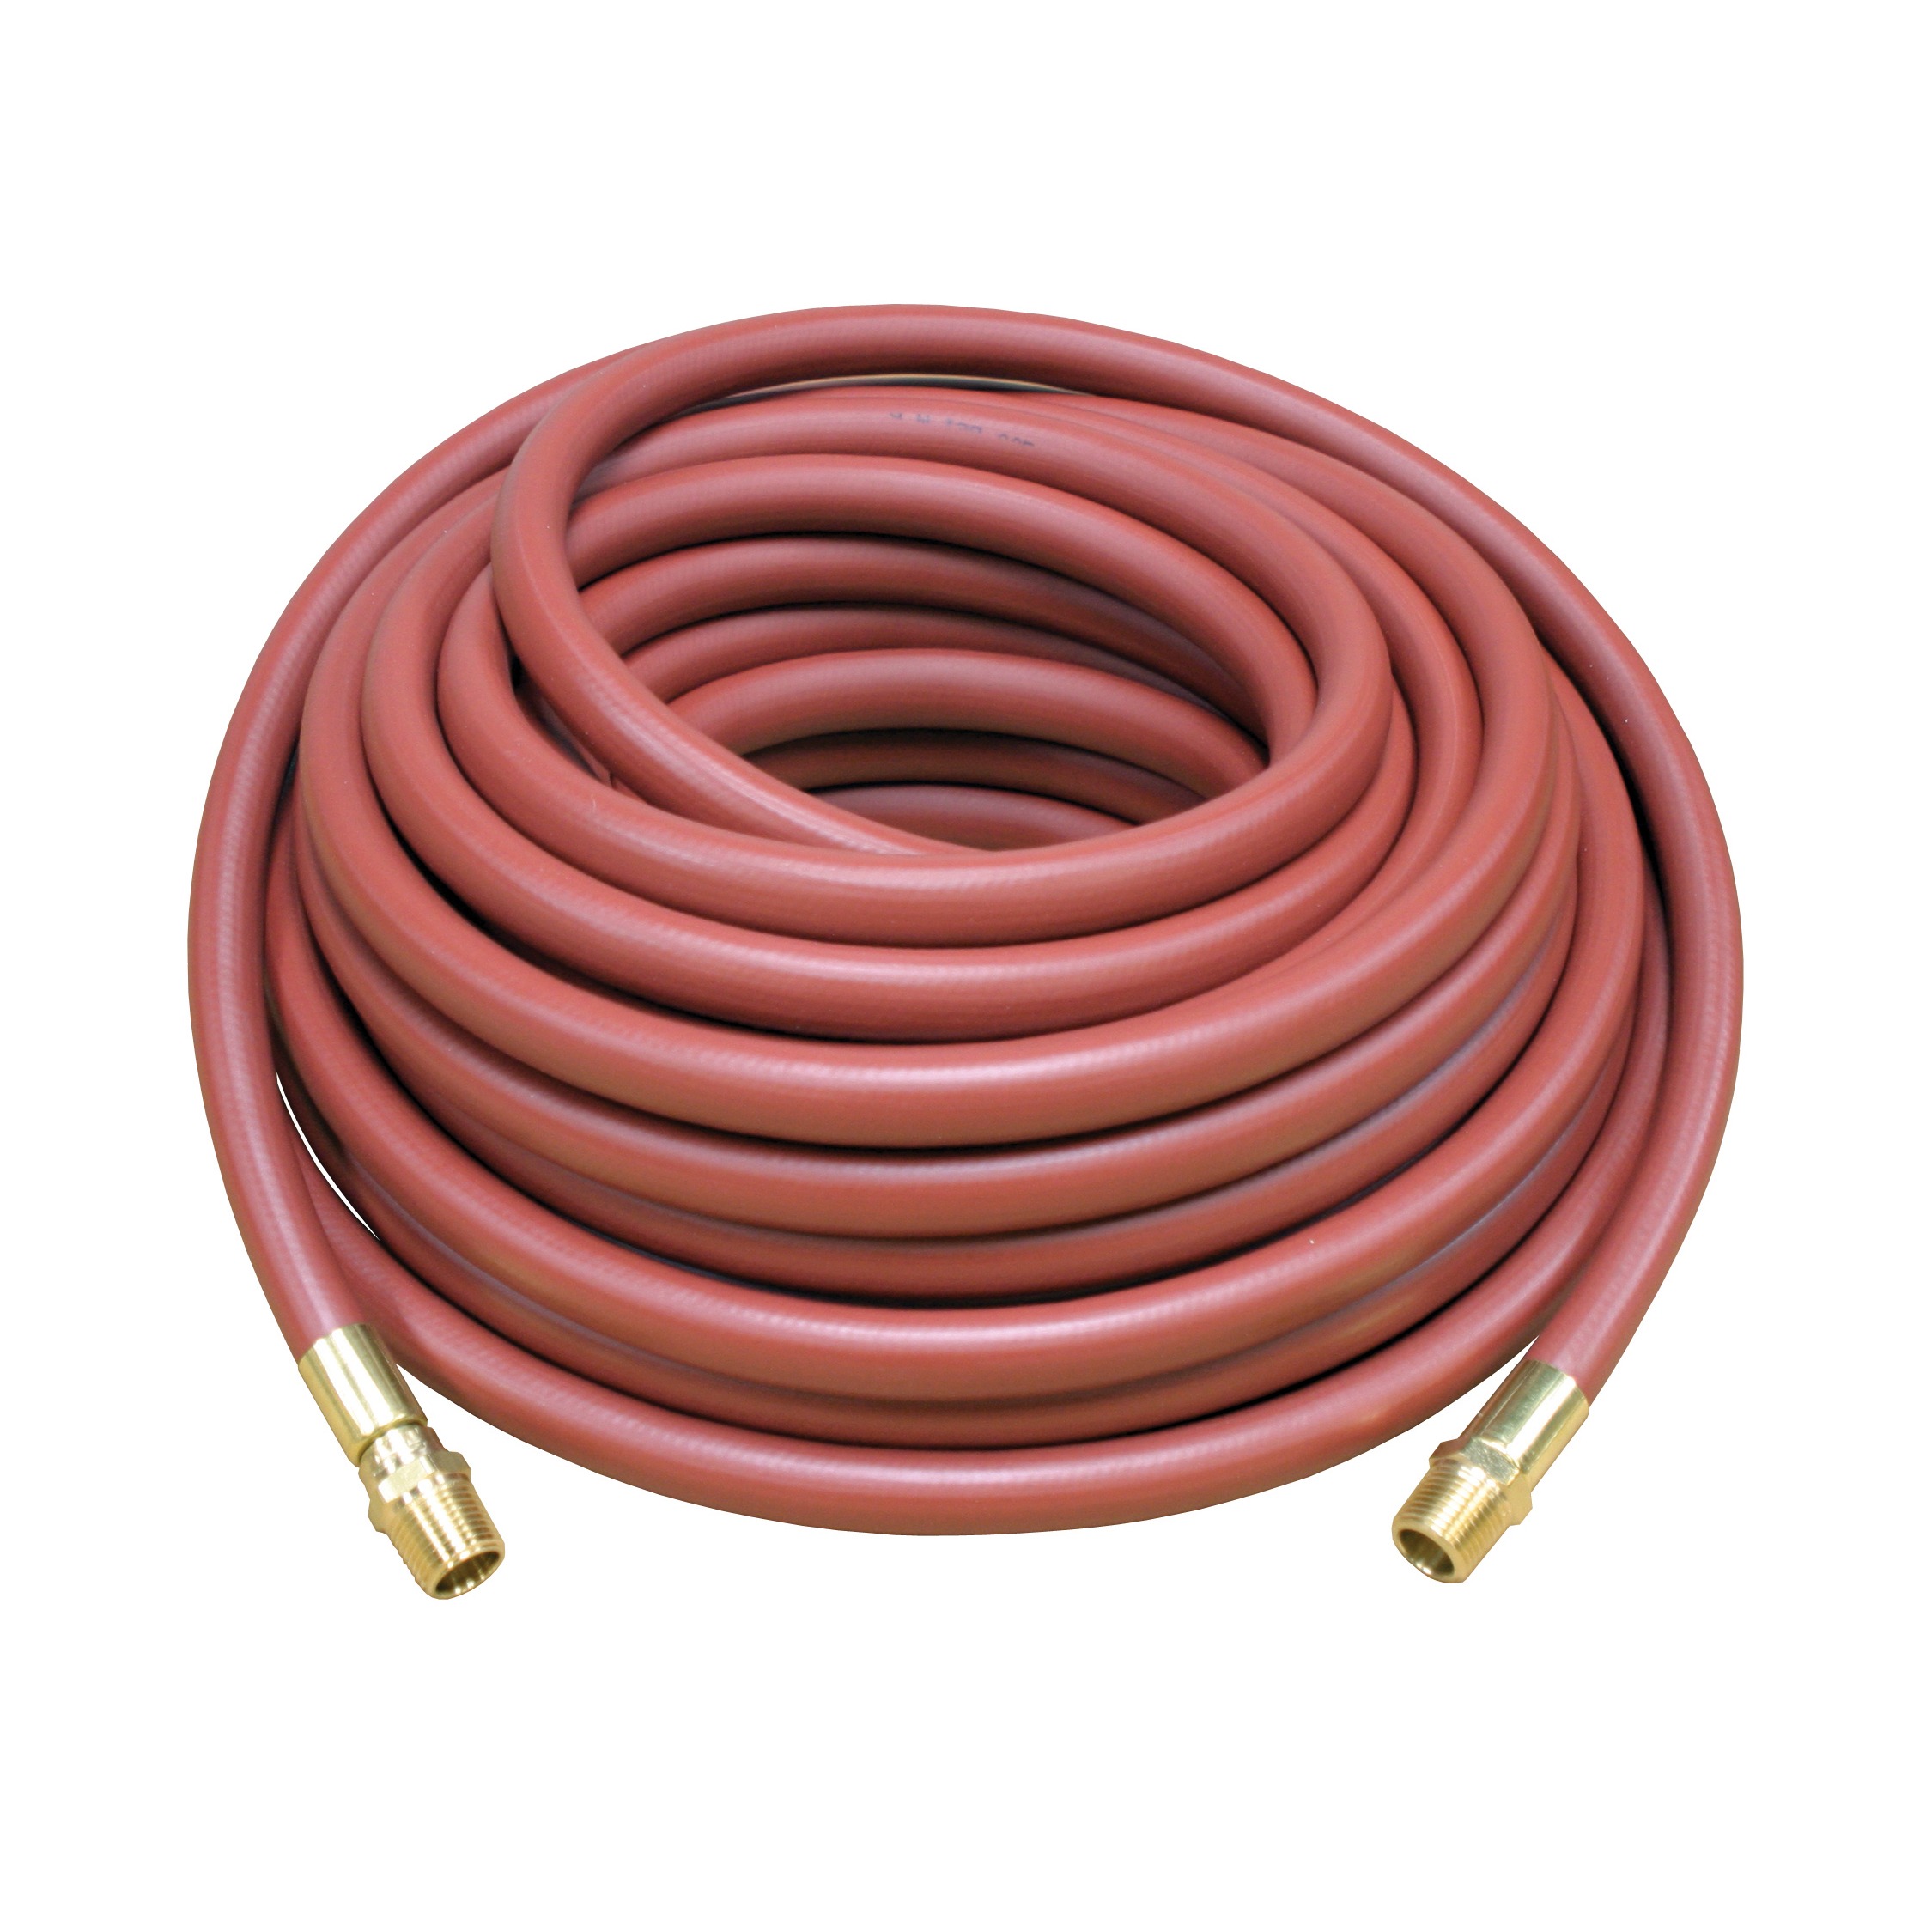 1.375 OD M Reelcraft S601027-2 Air/Water Inlet Hose Assembly 1 x 2 300 Psi 3/4 x 1 NPTF M Rubber 1 x 2' 3/4 x 1 NPTF 